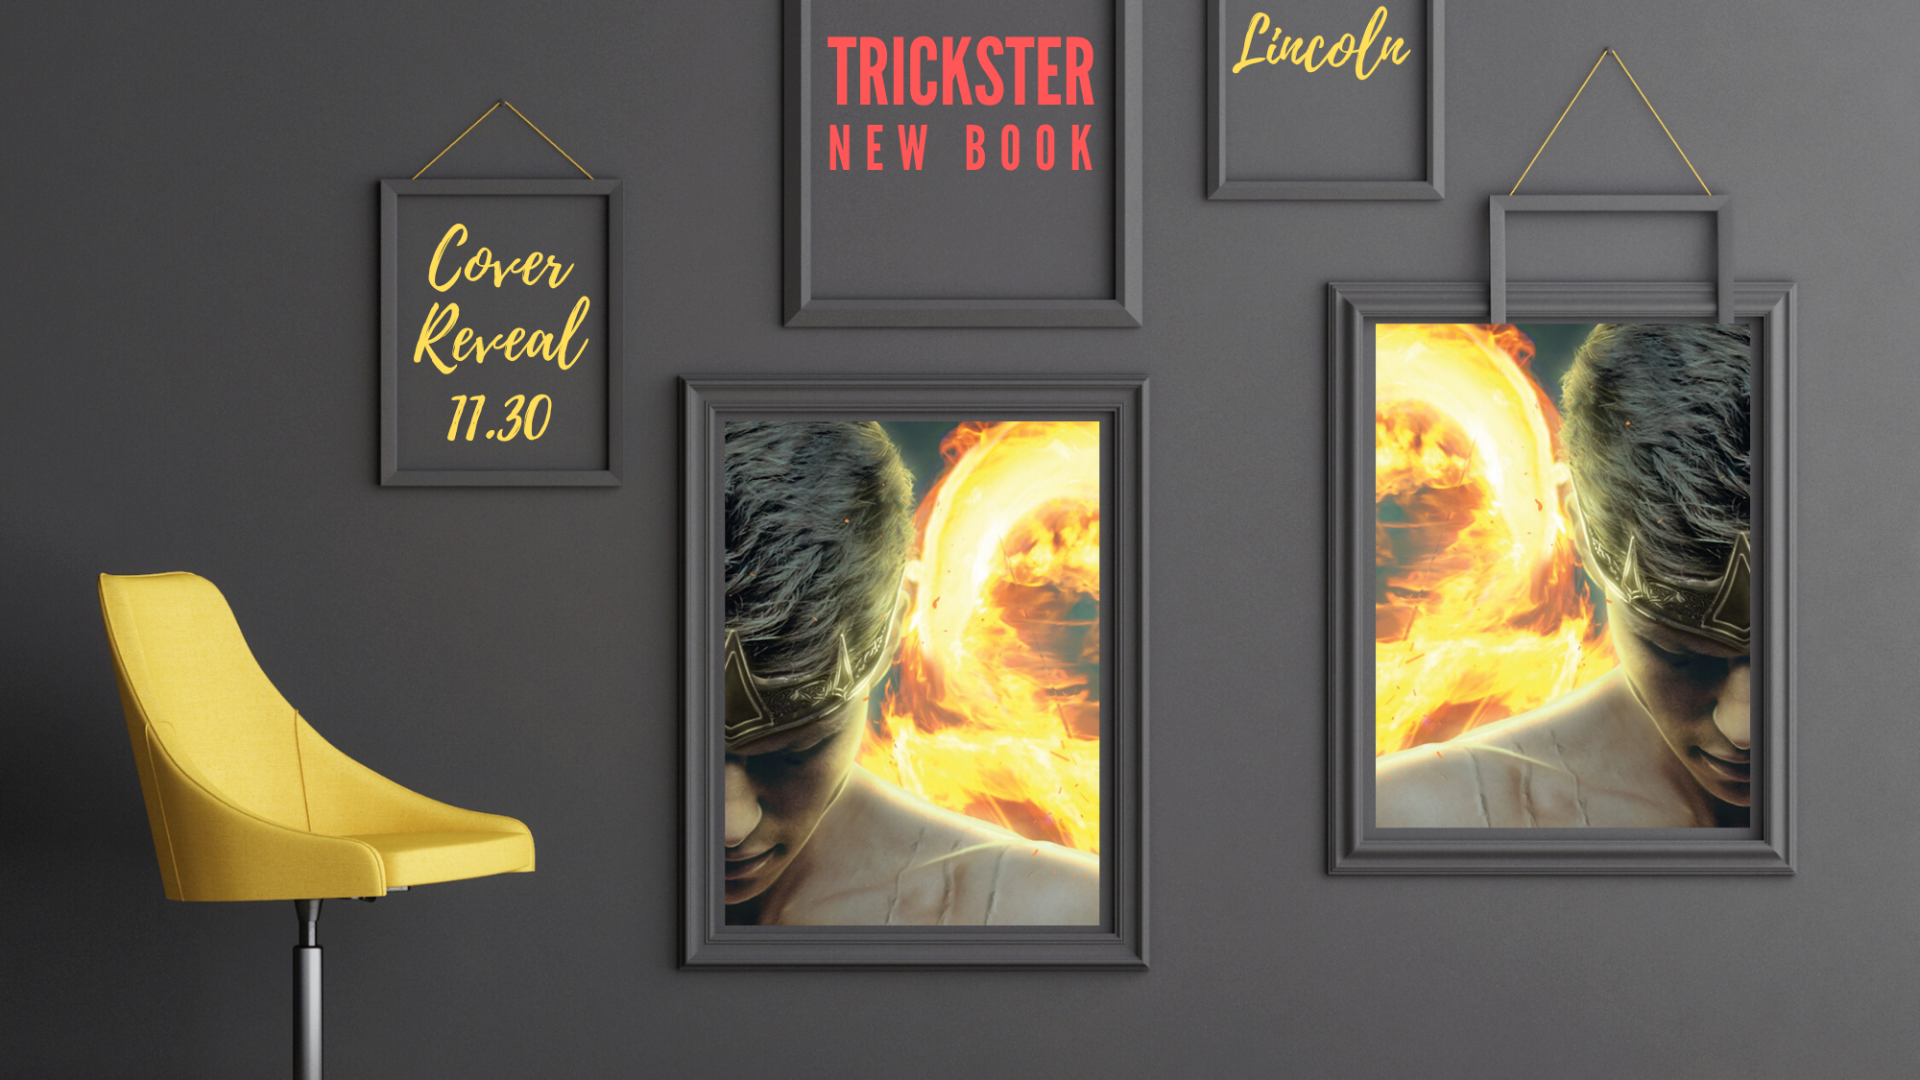 Coming 11.30 - TRICKSTER Cover Reveal!